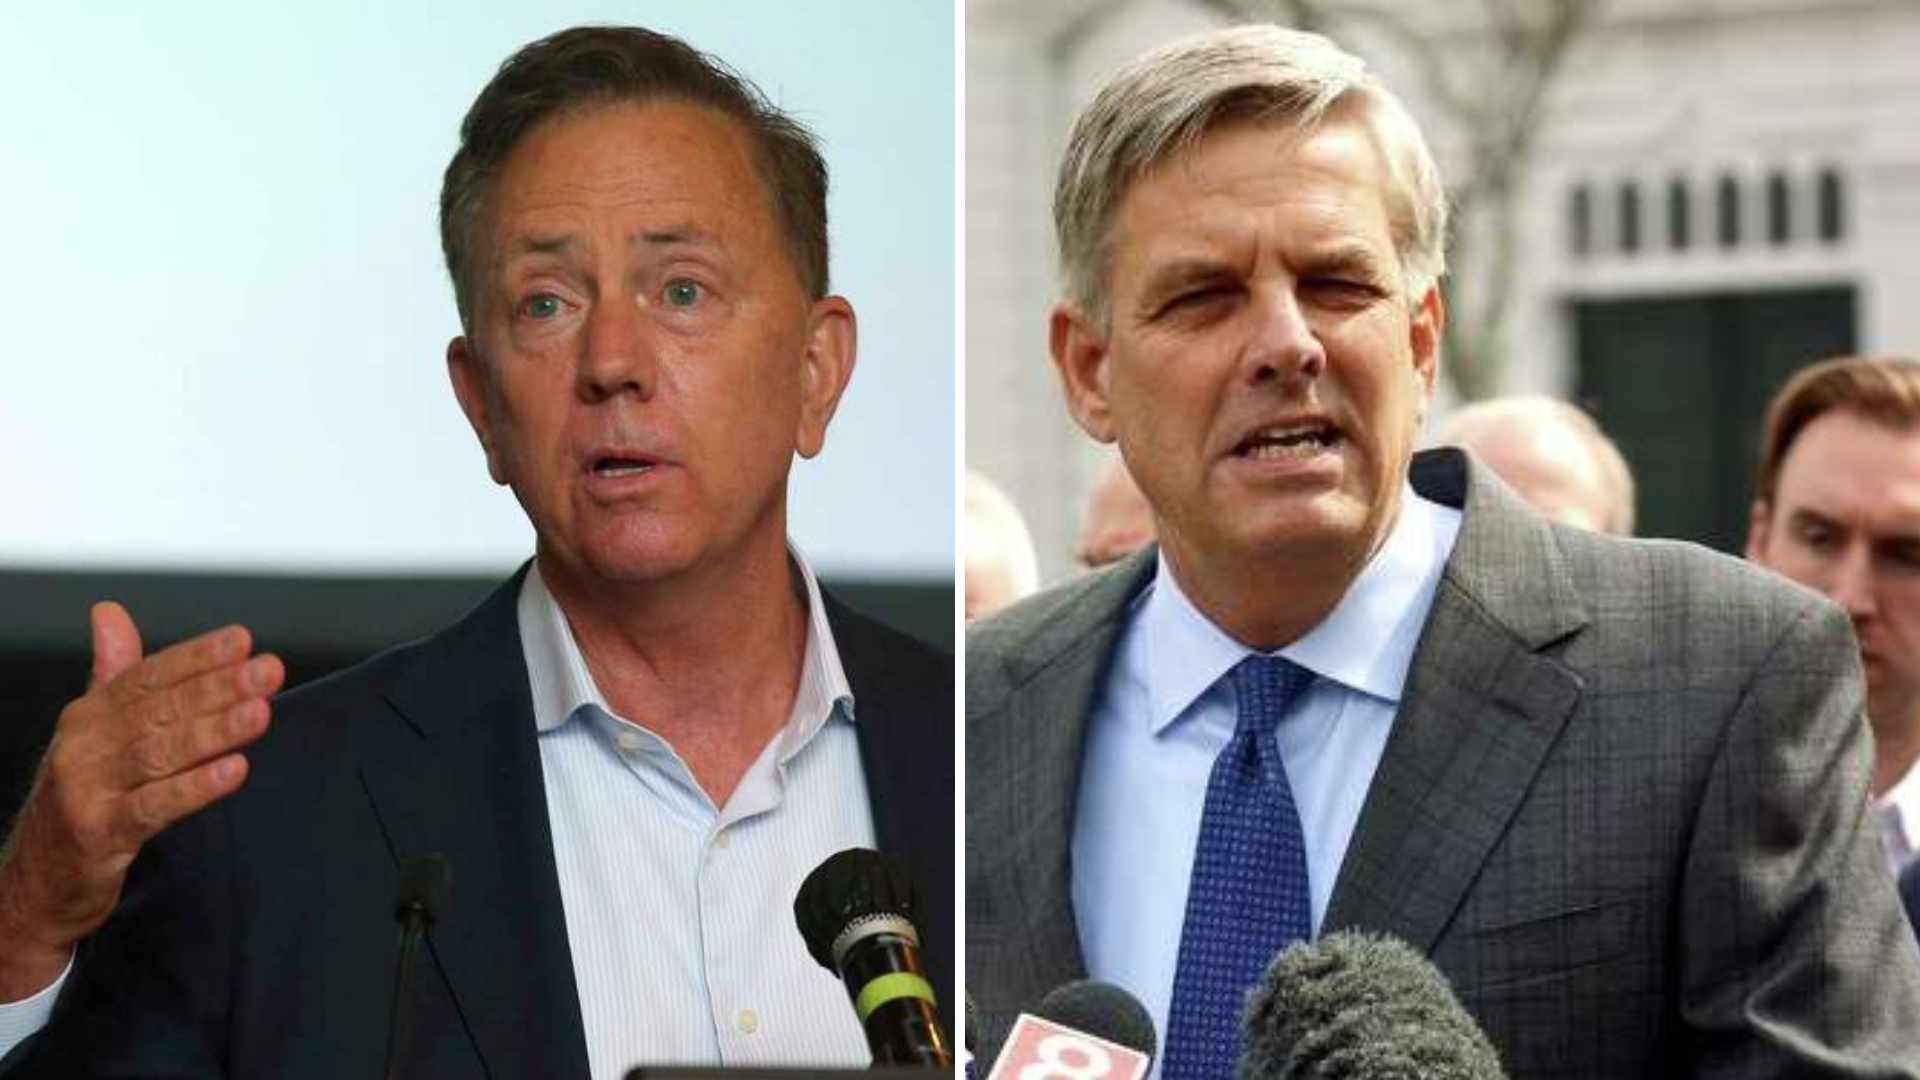 ct-governor-race-2022-lamont-stefanowski-face-off-in-forum